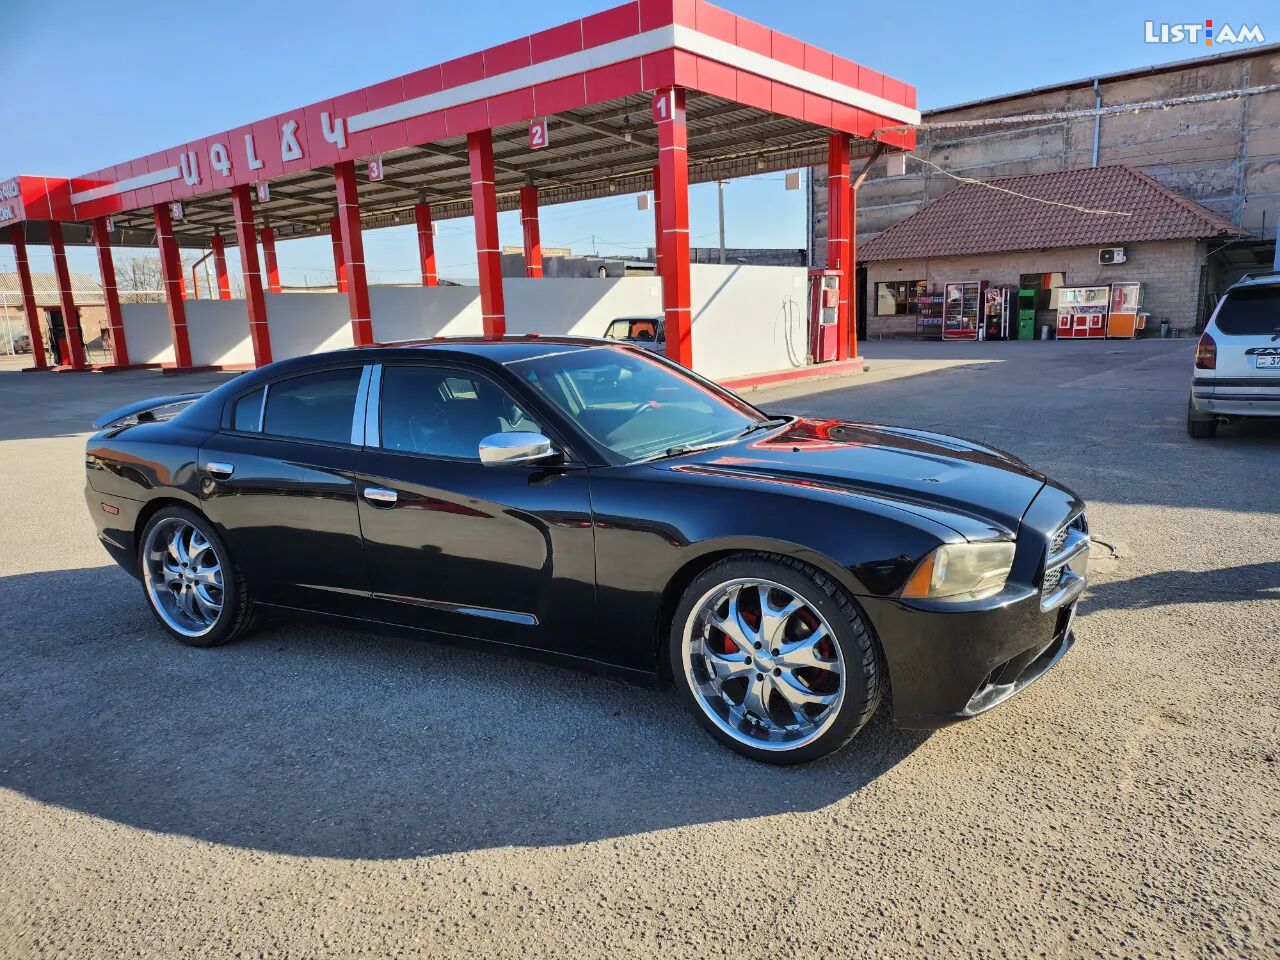 Dodge Charger, 3.6